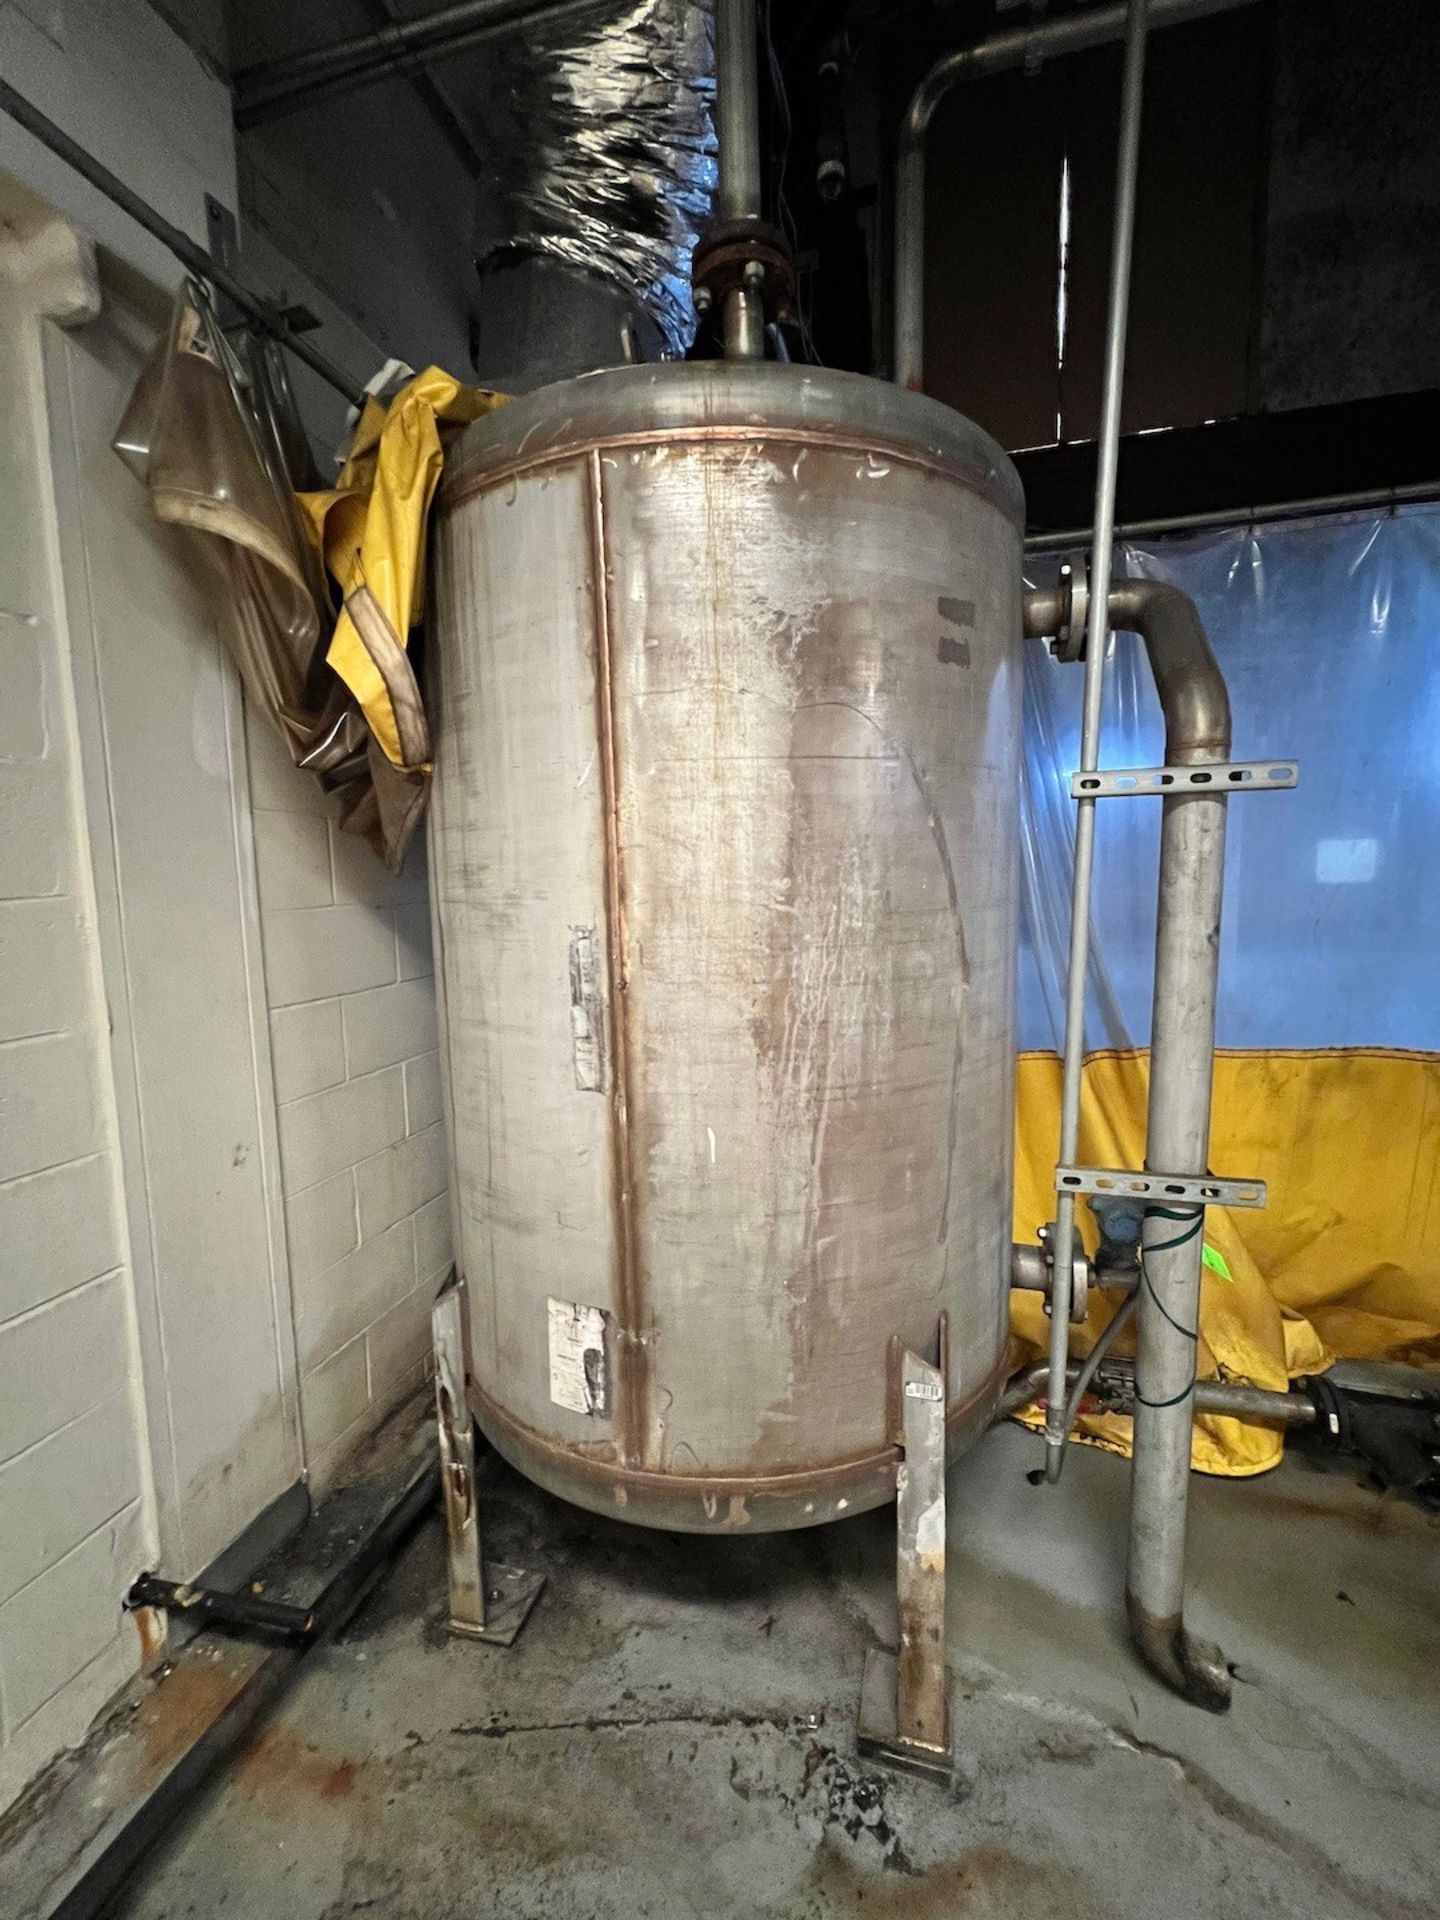 APPROX. 500 GALLON S/S TANK, APPROX. DIMS: 48 IN. DIA X 60 IN. L (SIMPLE LOADING FEE $550) - Image 2 of 5